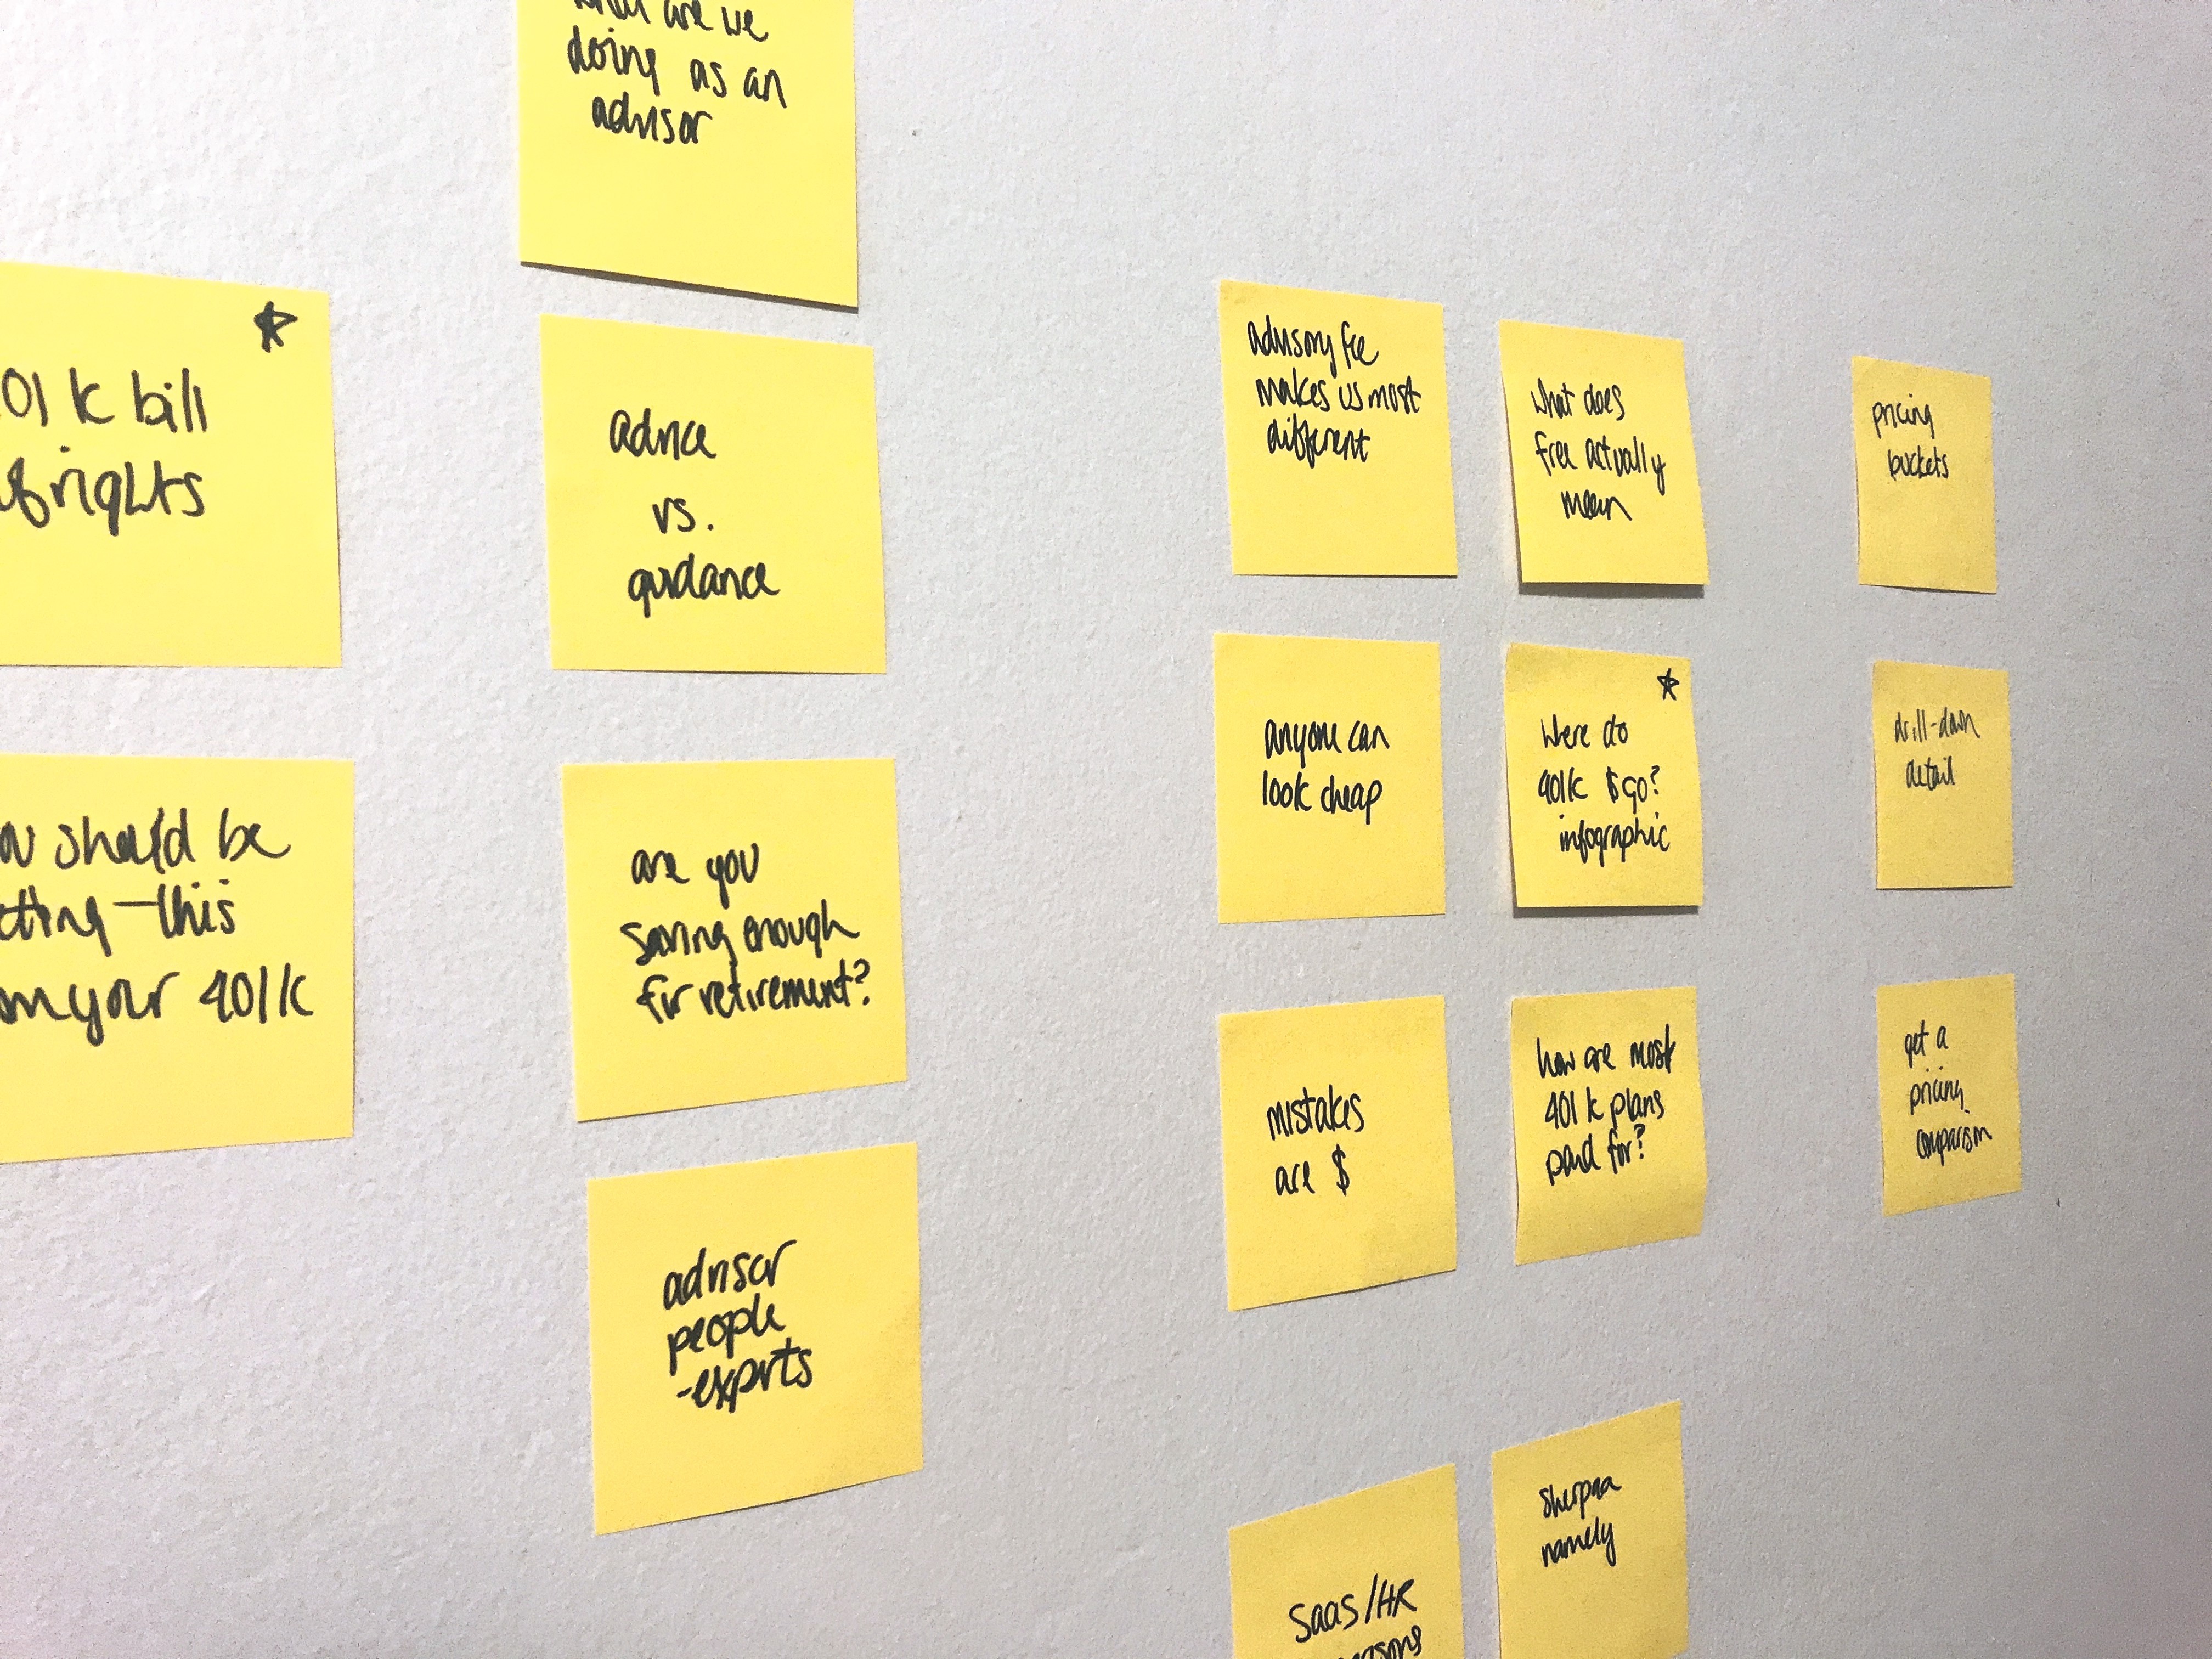 Post-it notes with pricing ideas